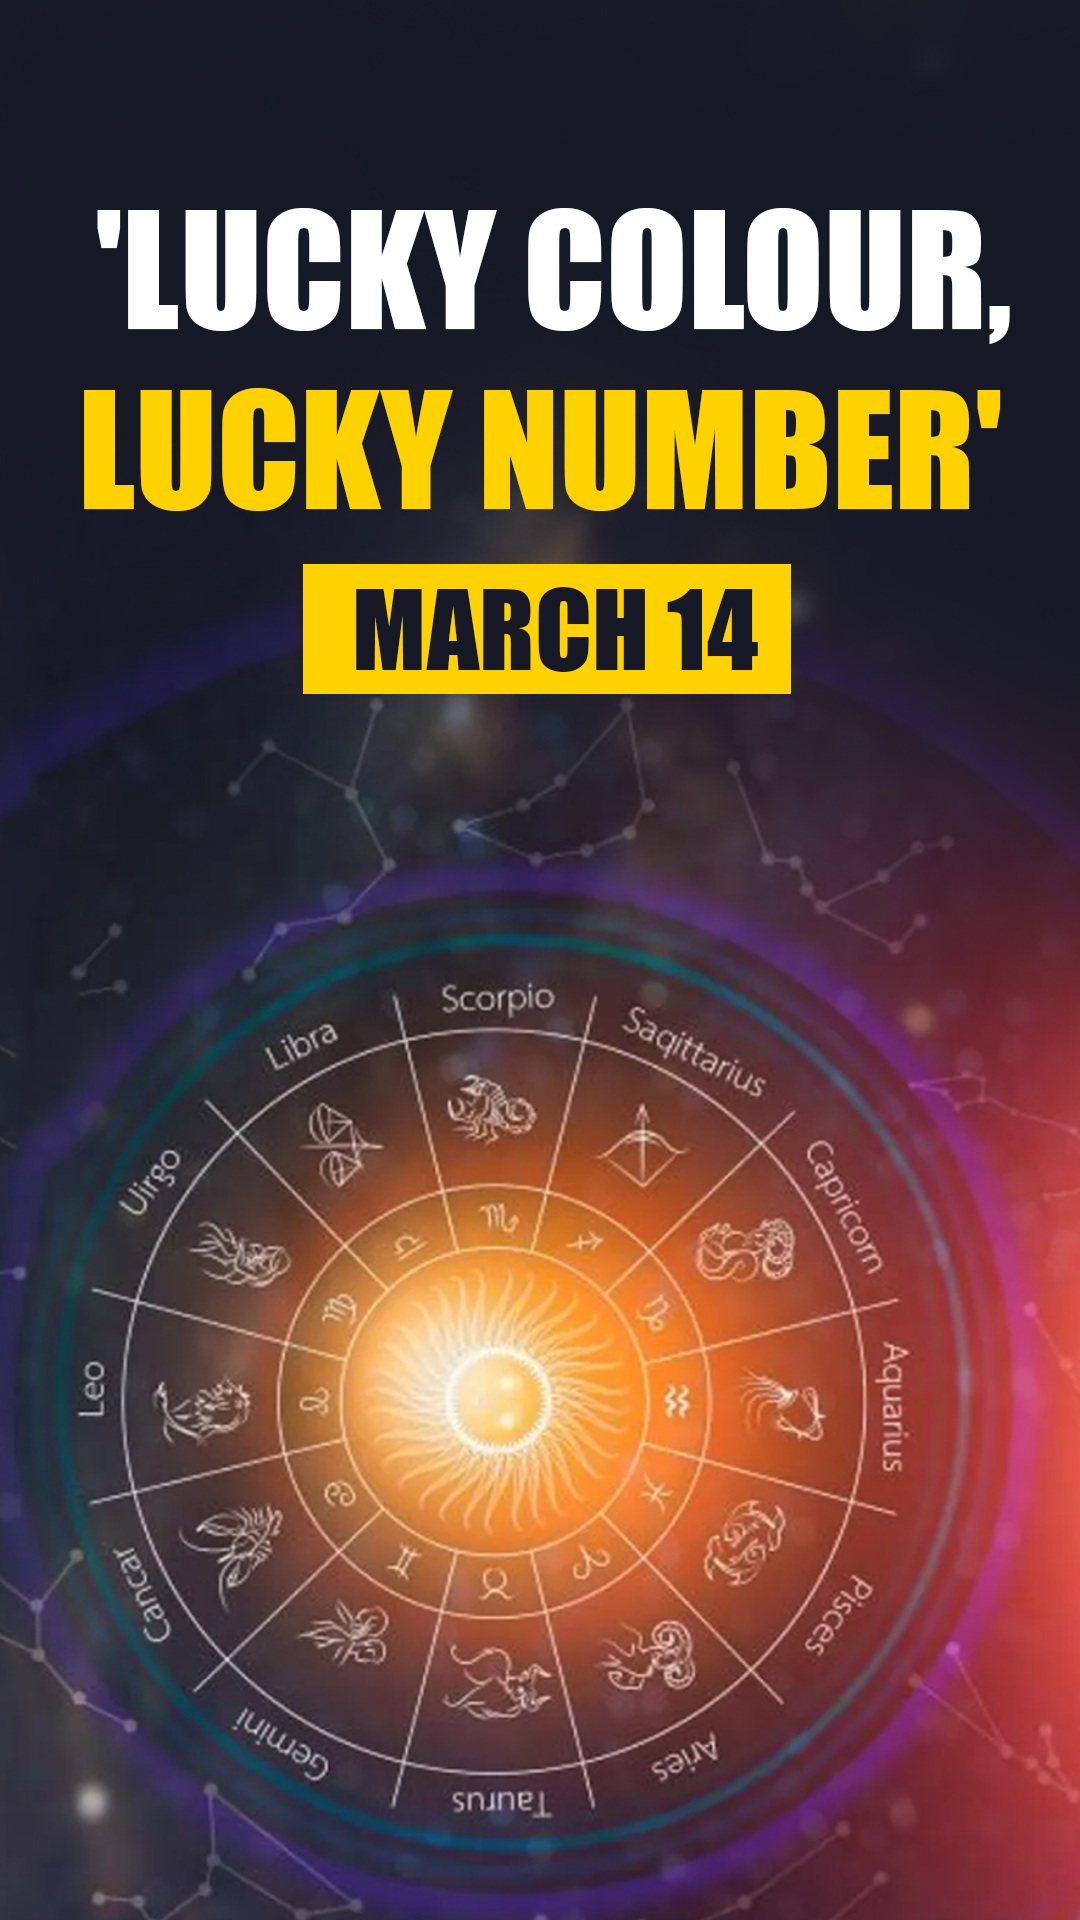 Know lucky colour, number of all zodiac signs in horoscope for March 14